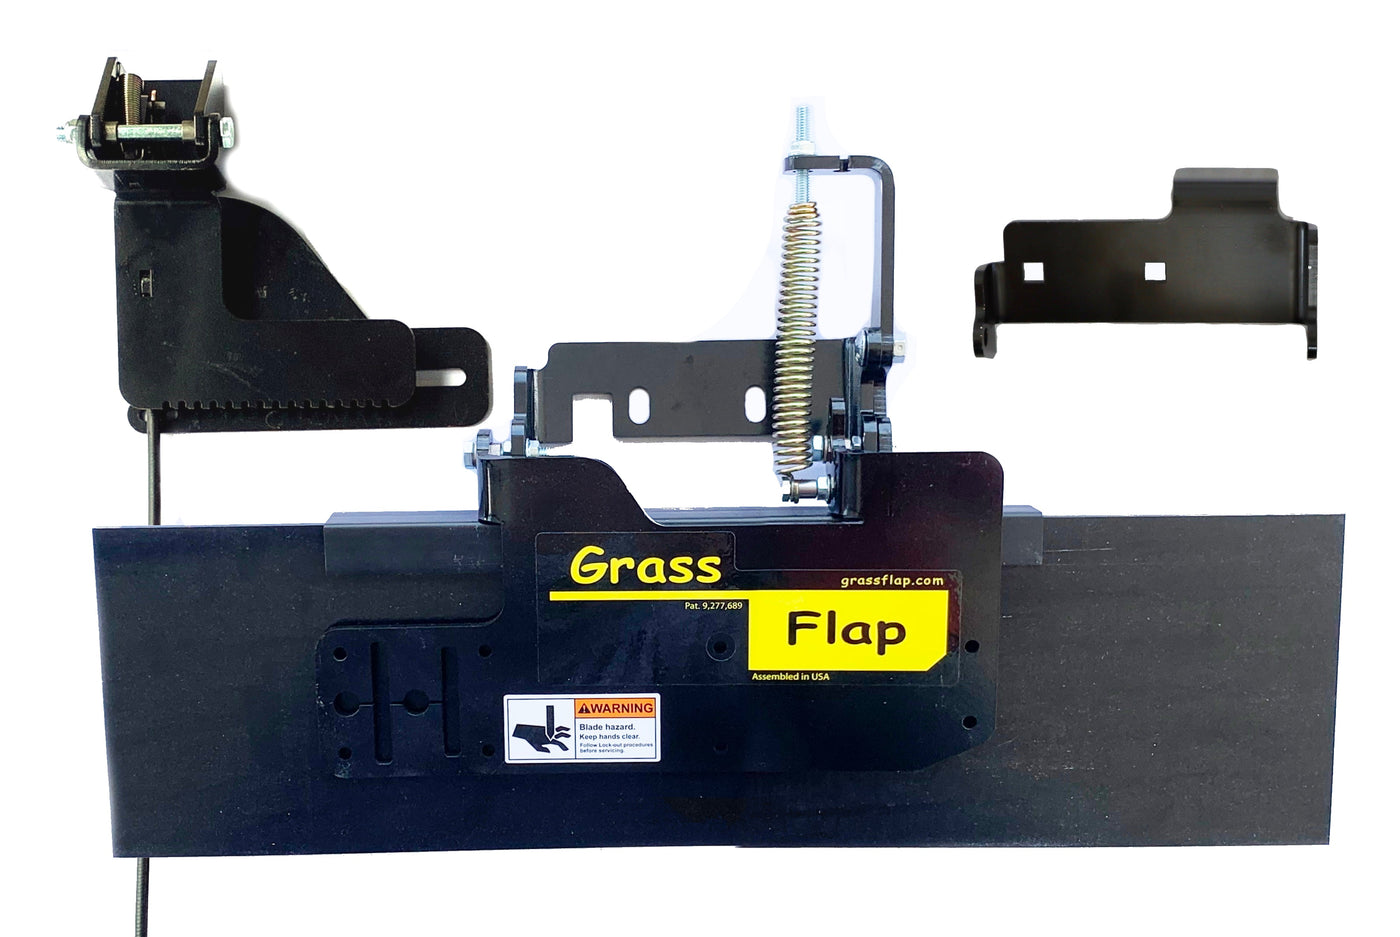 412T50-5L Low Profile Heavy-Duty GrassFlap with SEL Pedal Includes No-Drill Mount